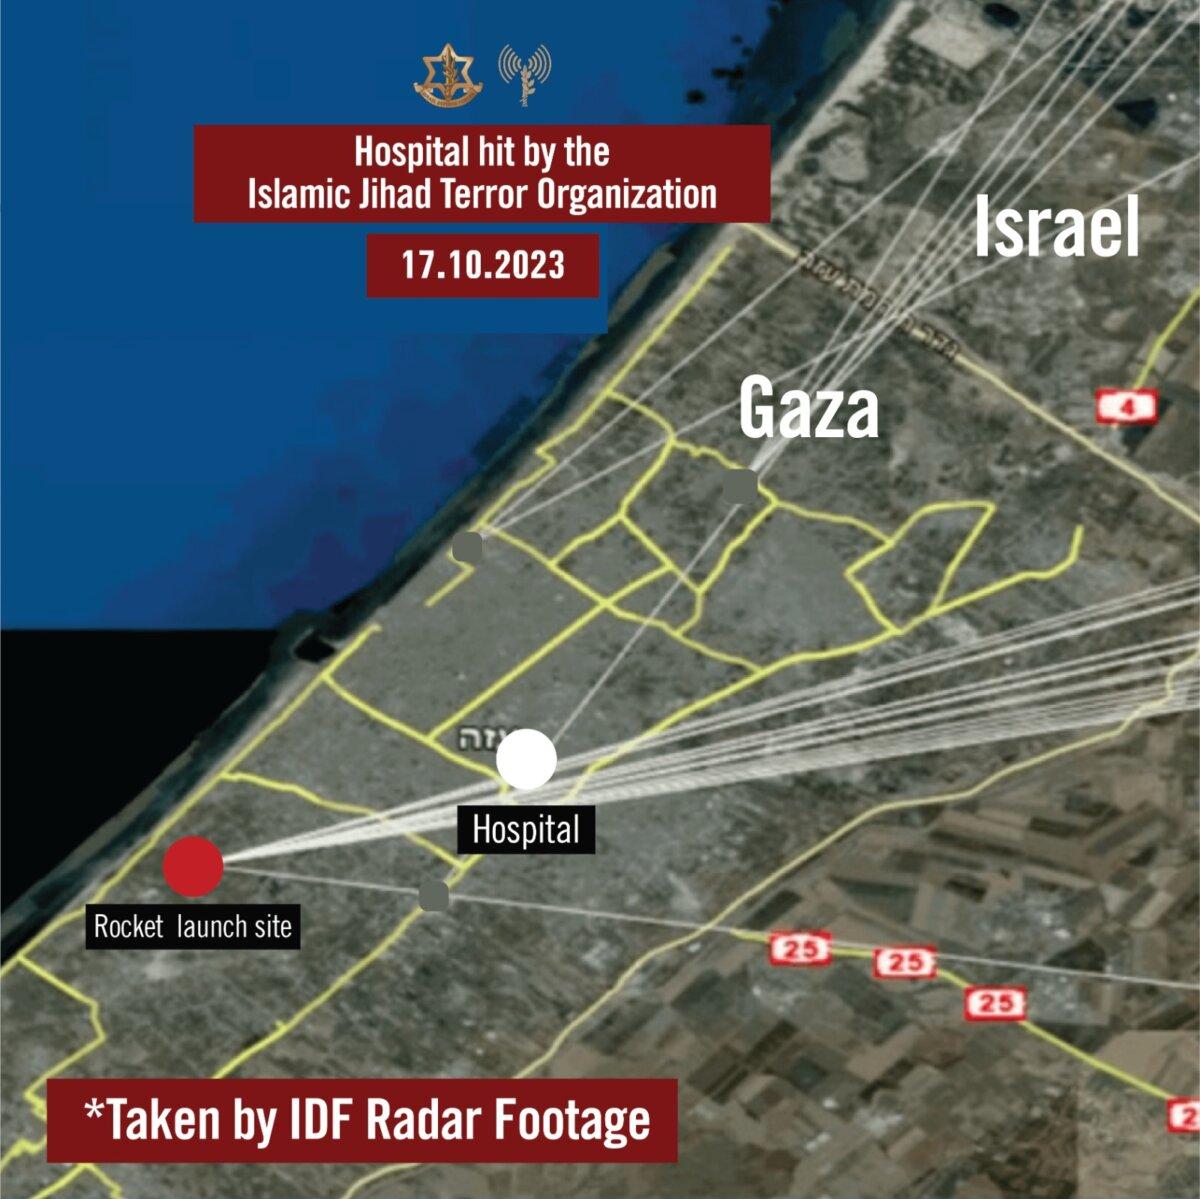 Image provided by the Israeli military showing the trajectory of multiple rockets targeting Israel, with the al-Ahli hospital in the direct line of fire. (IDF)